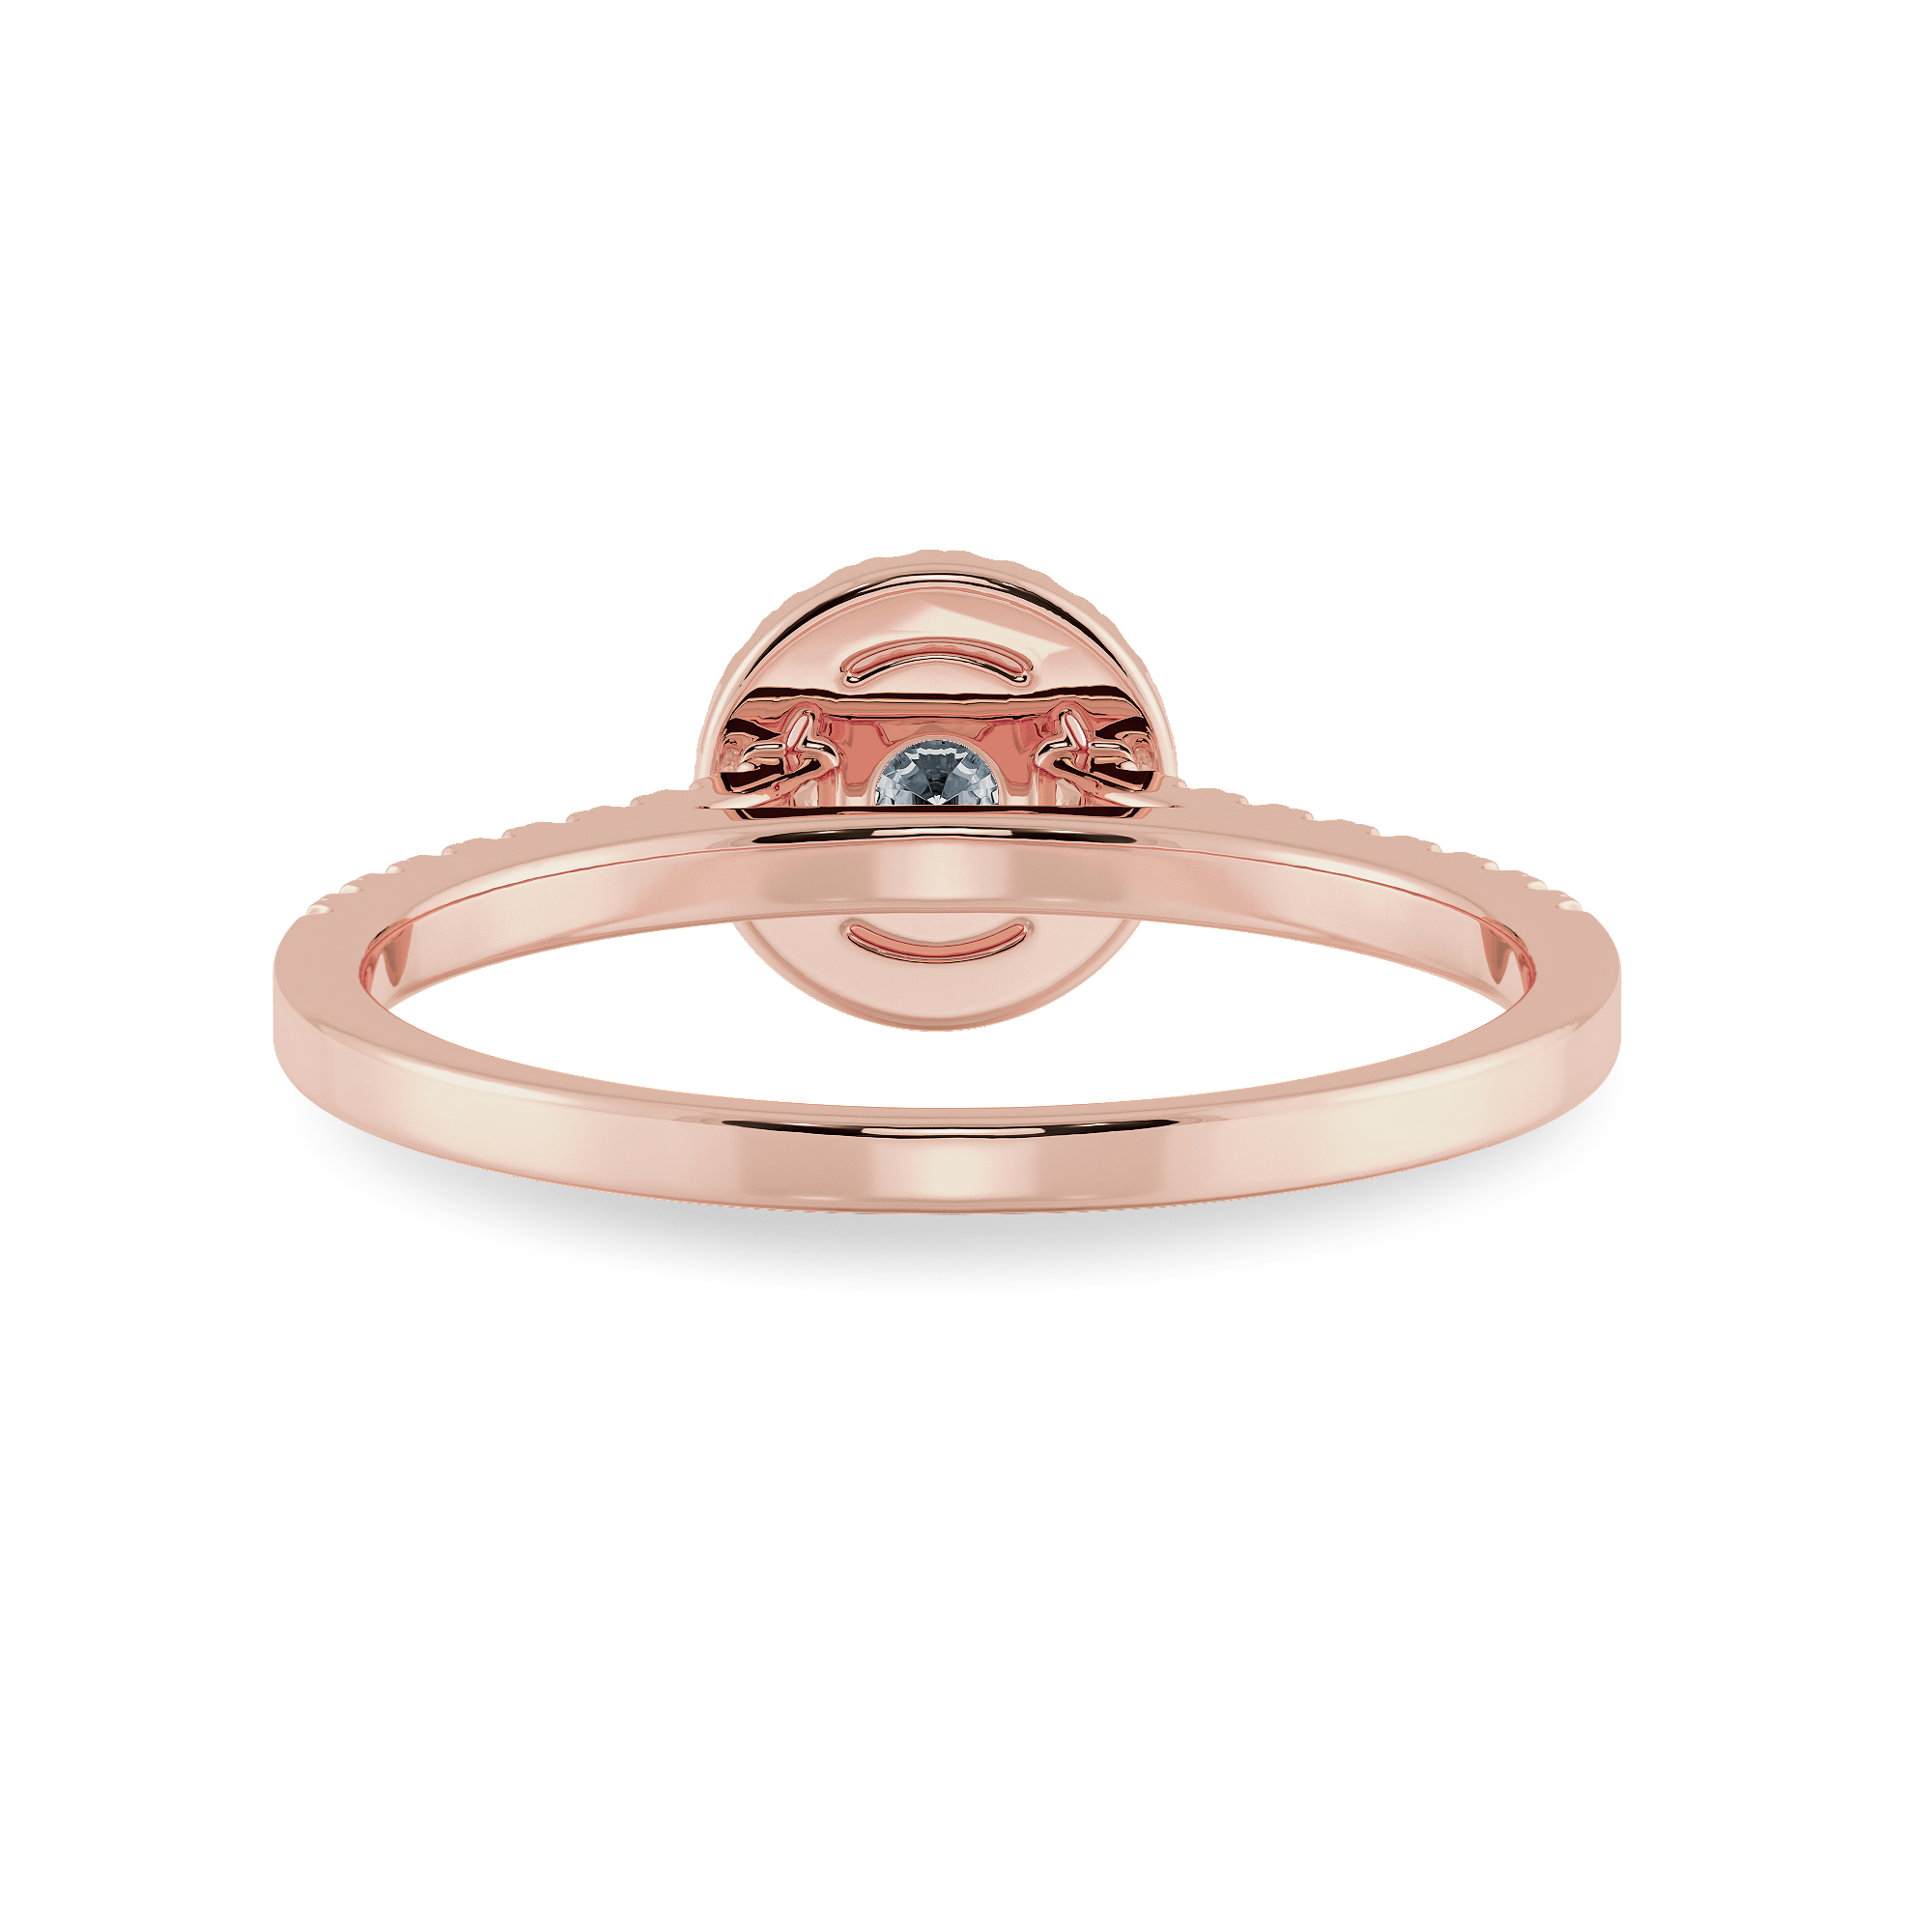 0.30cts. Solitaire Diamond Halo Shank 18K Rose Gold Ring JL AU 1193R